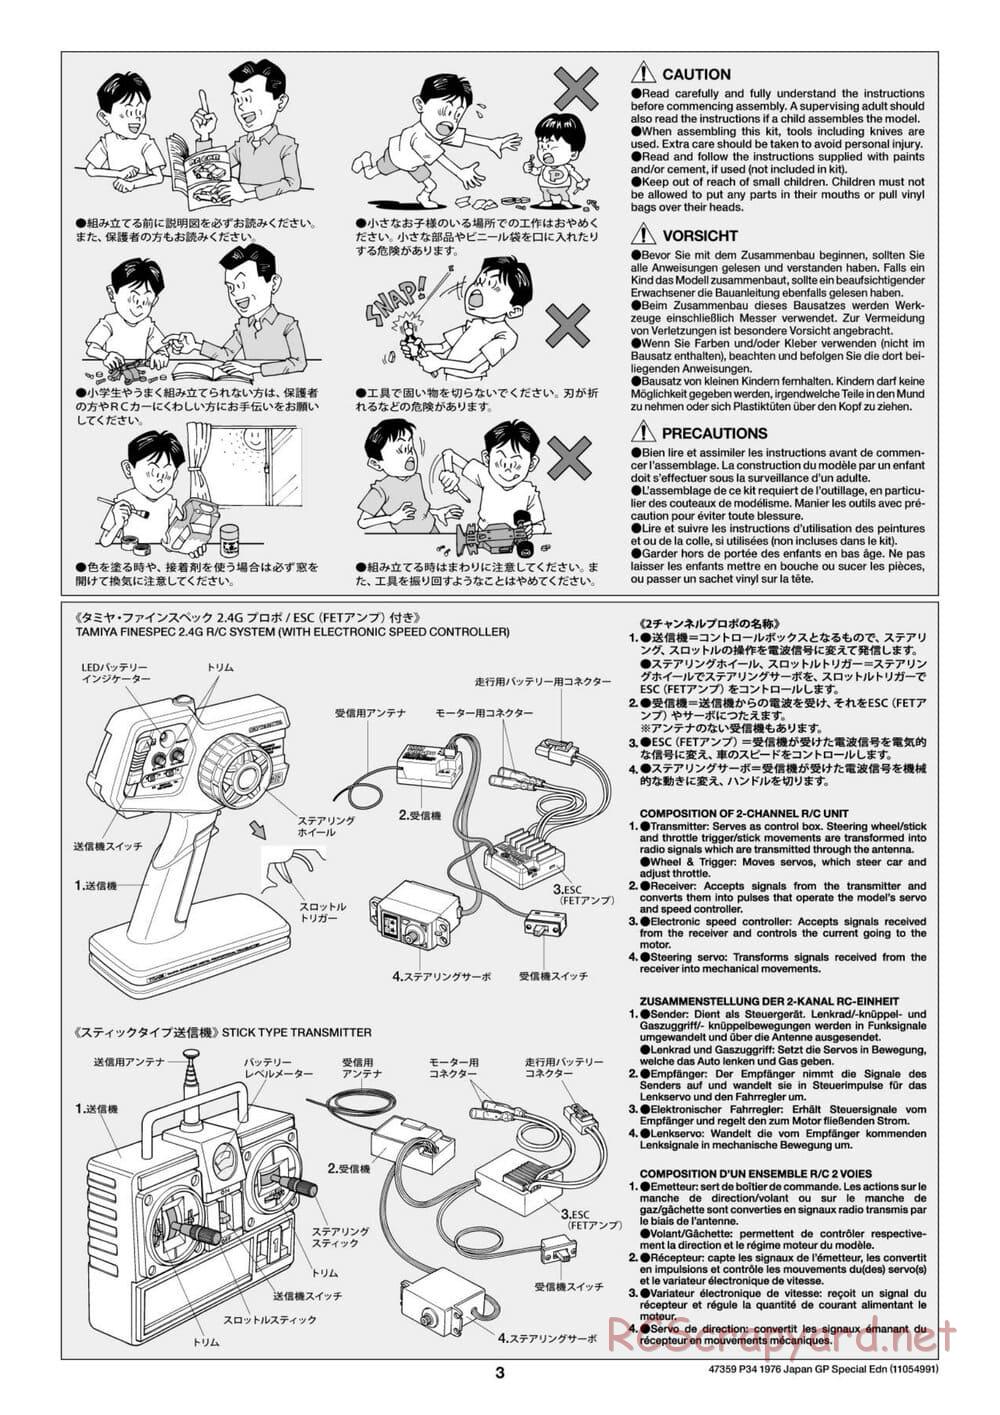 Tamiya - Tyrrell P34 1976 Japan Grand Prix Special - F103-6W Chassis - Manual - Page 3